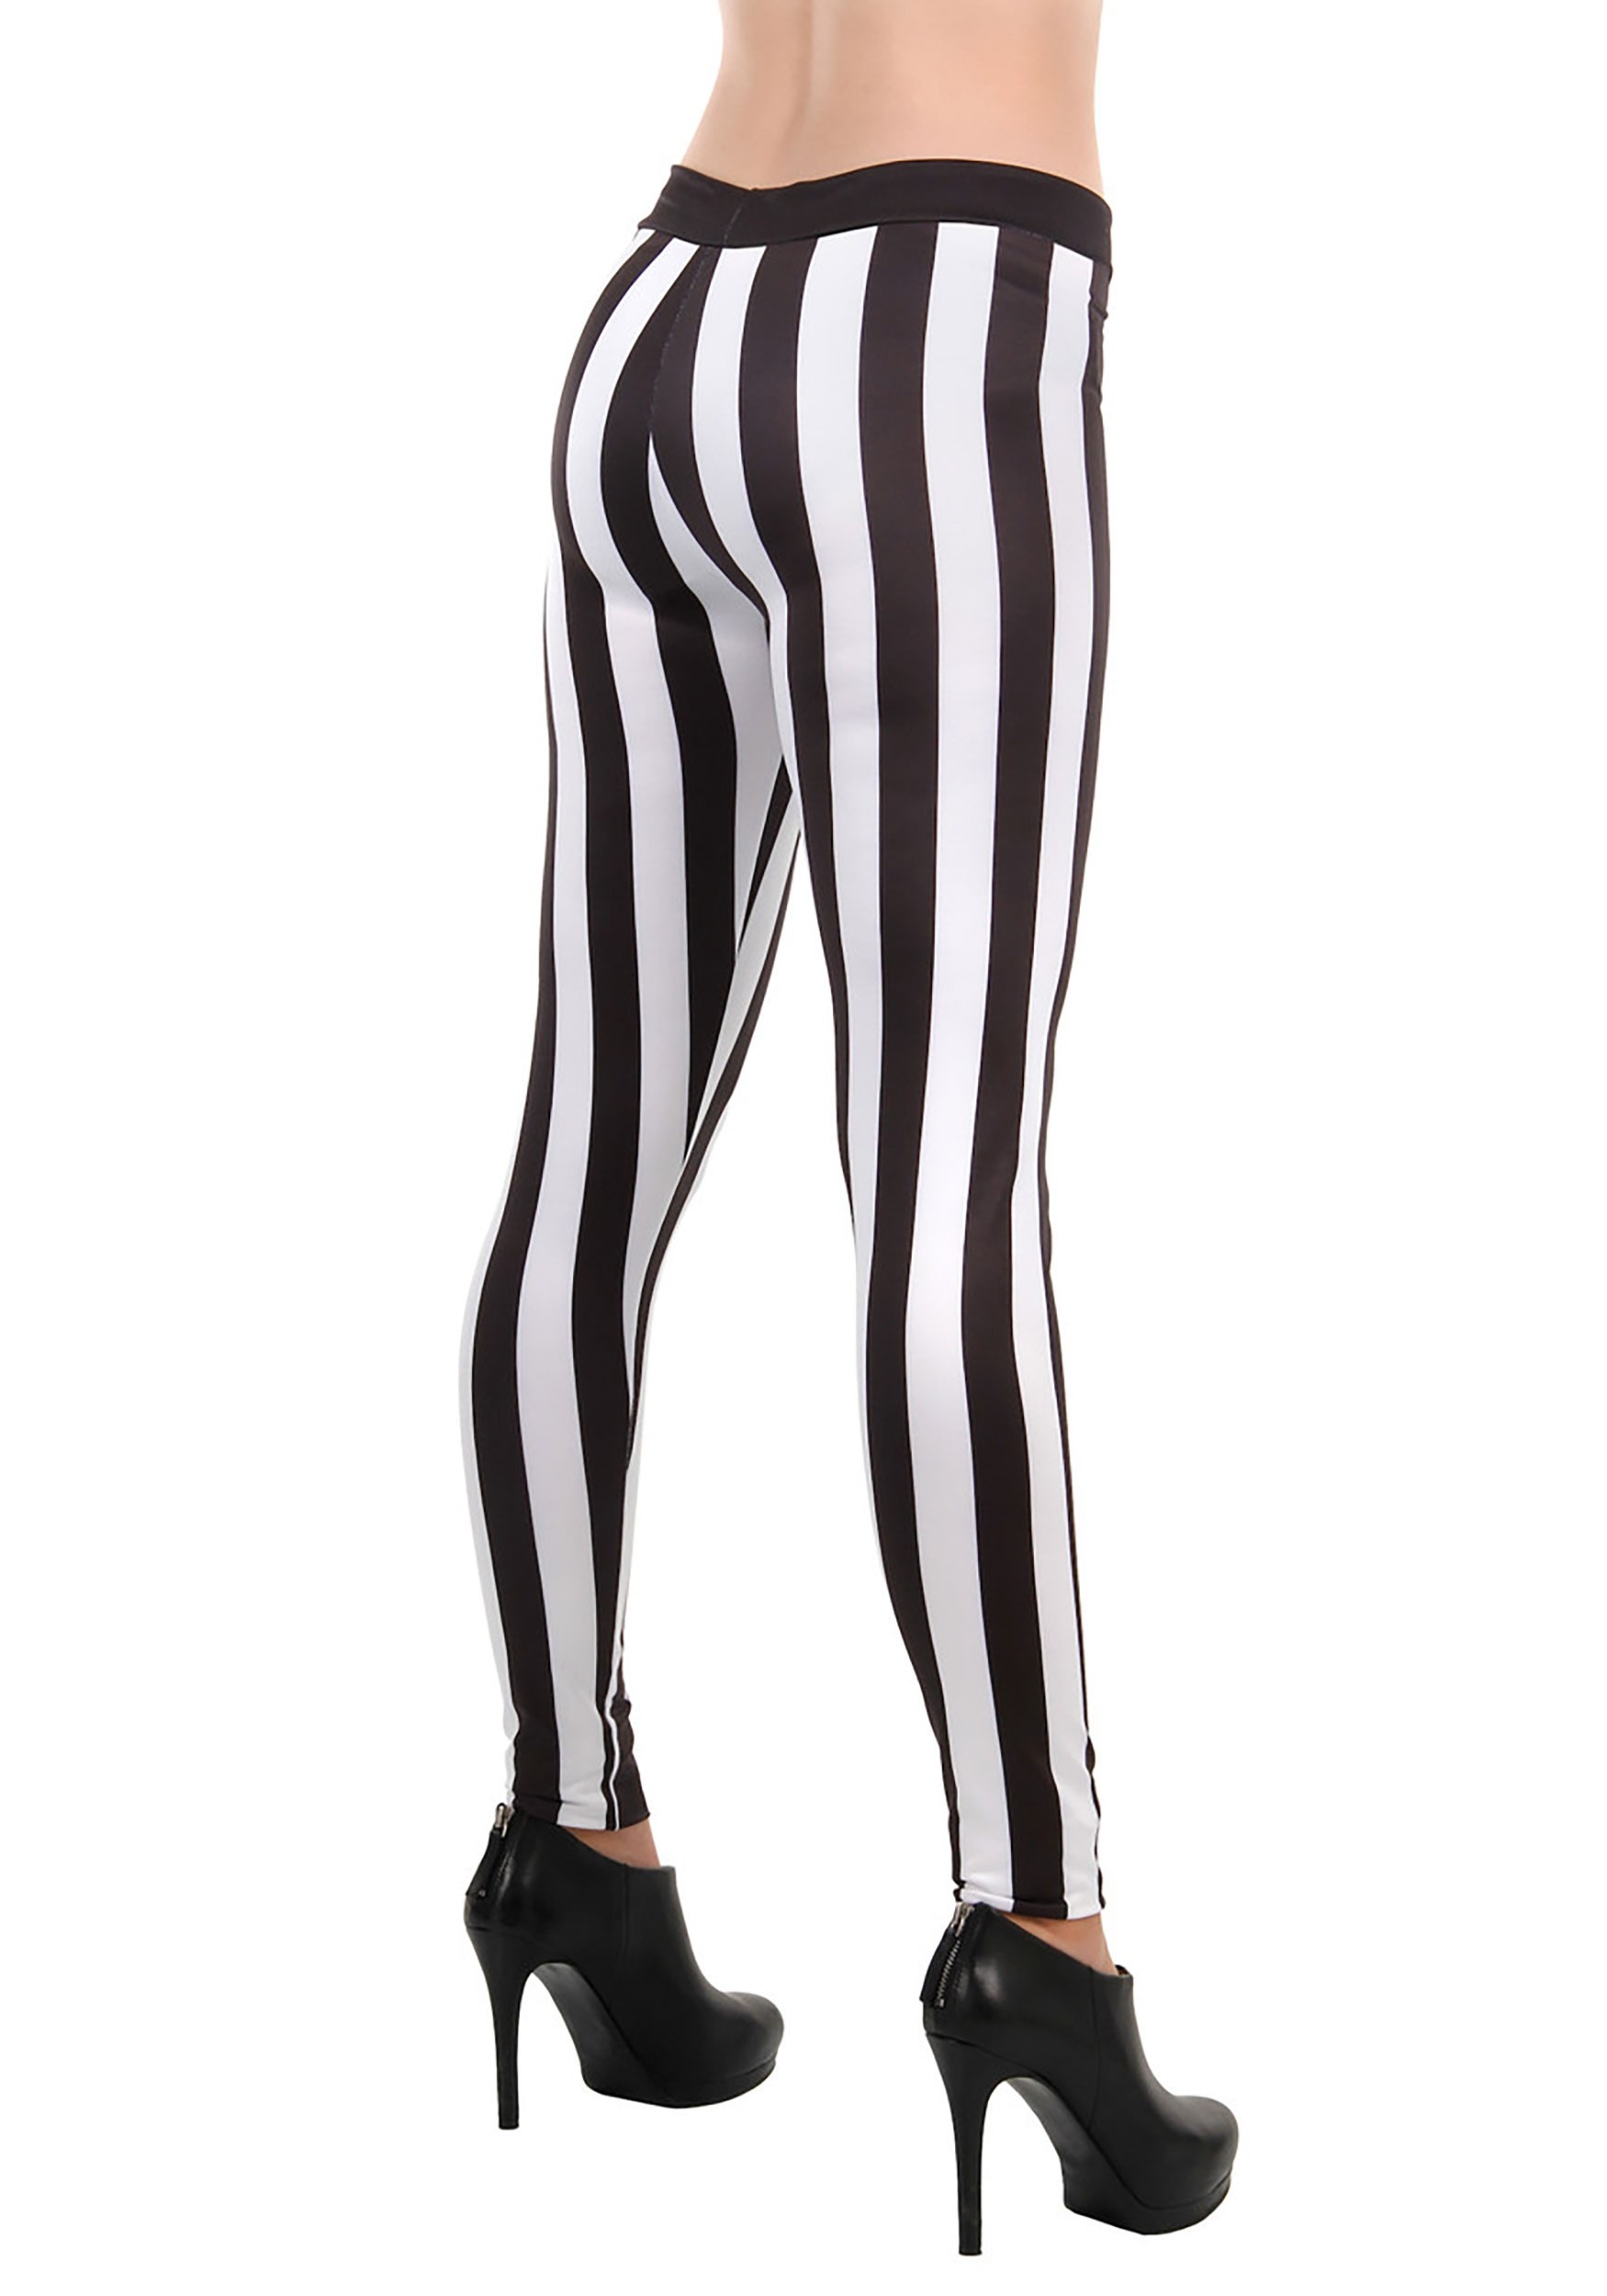 Red and Black Striped Leggings Women, Halloween Witch Goth Printed